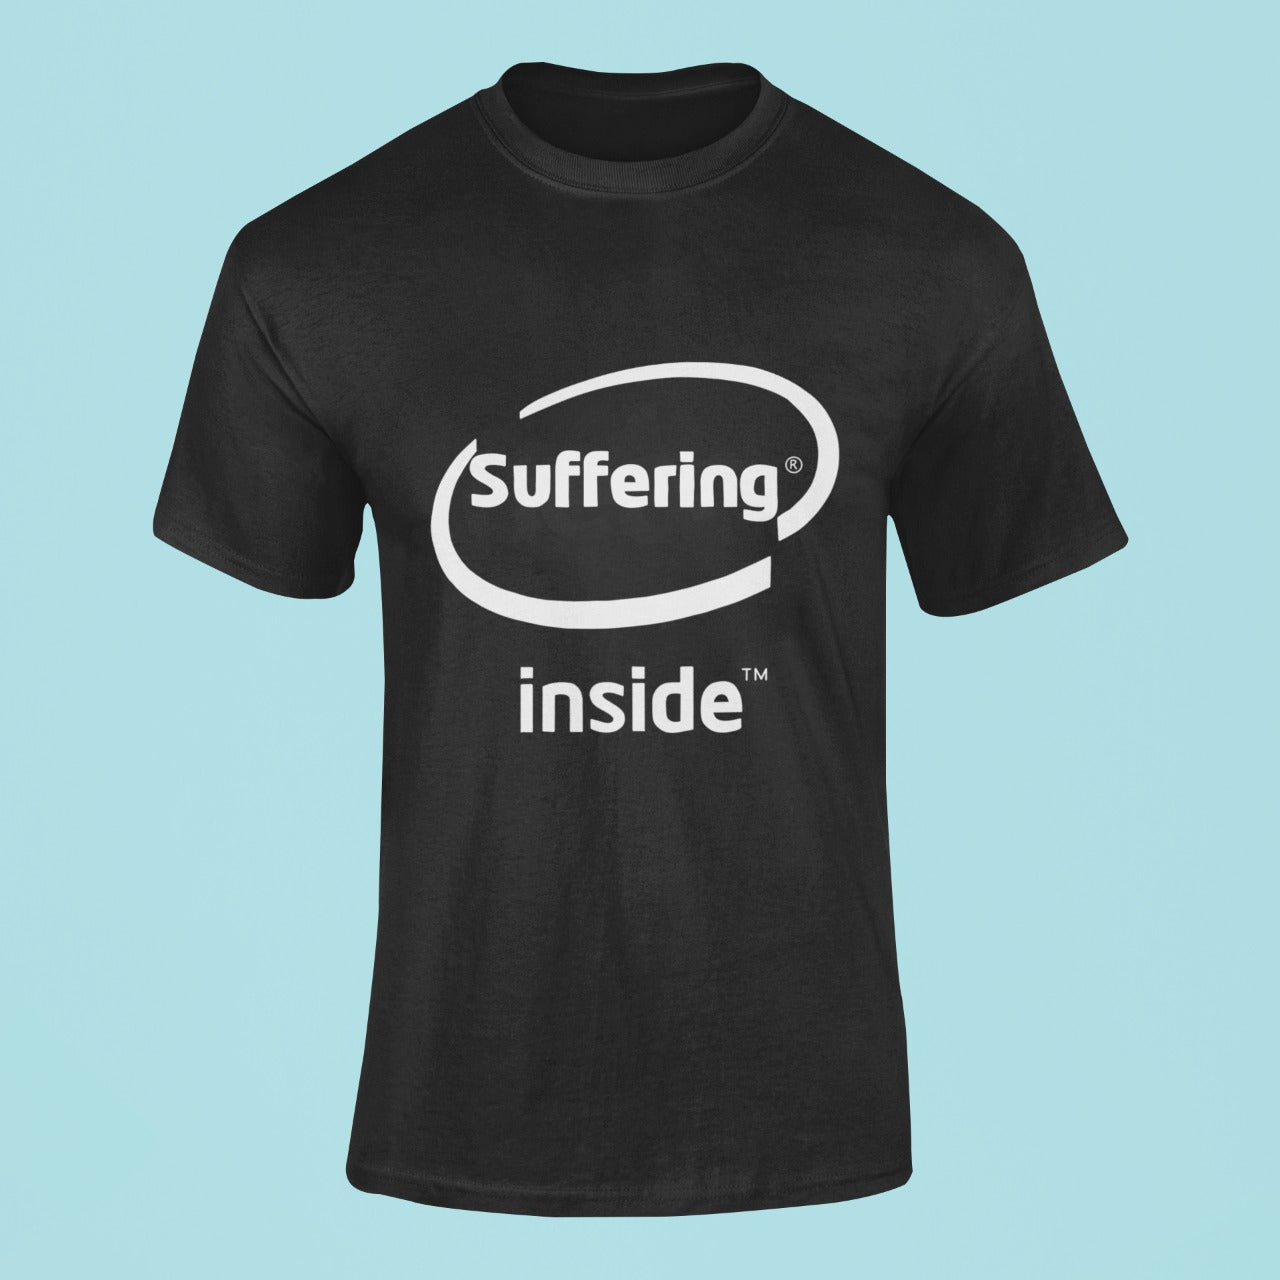 Add some humor to your wardrobe with our black "Suffering Inside" t-shirt, featuring a graphic design inspired by the popular meme and Intel Inside logo. Made with high-quality materials, this edgy shirt is perfect for making a statement and showing off your love for internet culture. Order now and join the trendsetting meme enthusiasts!